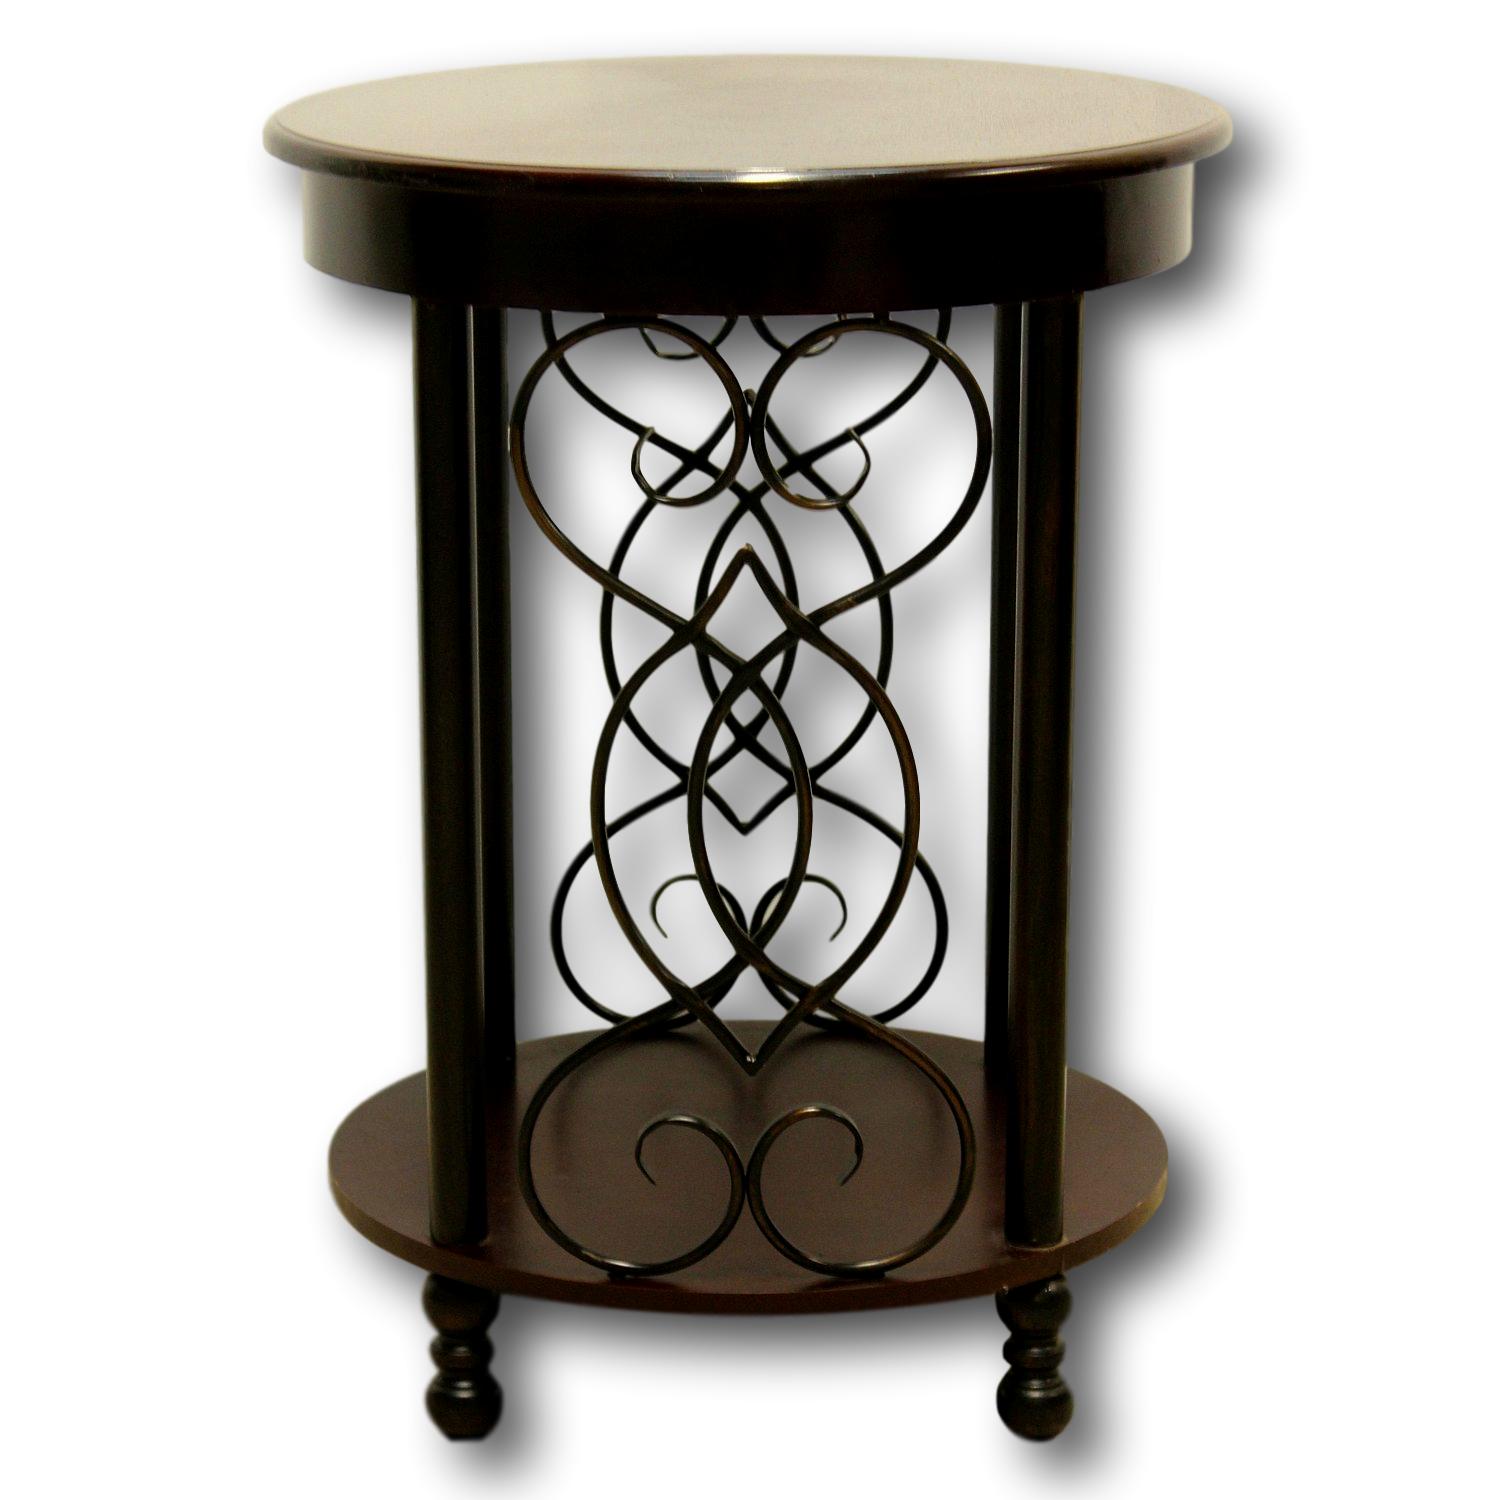 dark cherry metal accent table upscale consignment gray gold with marble top white night tables for bedroom antique side inlay target kitchen chairs best modern coffee unique